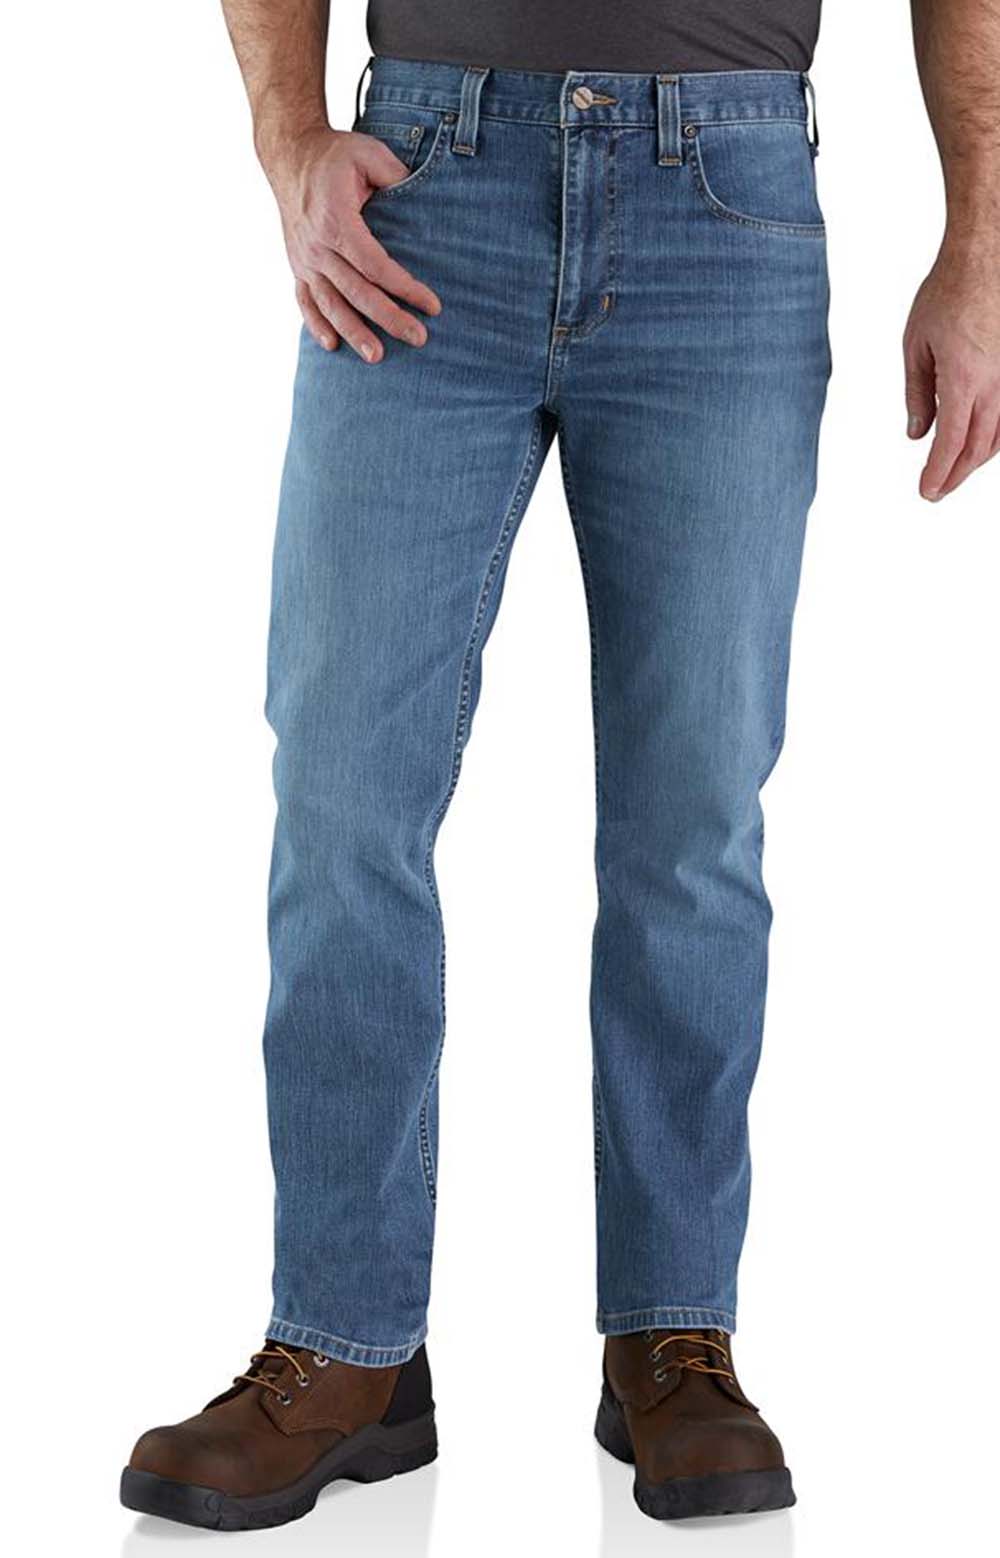 (102804) Rugged Flex Relaxed Fit Straight Leg Jean - Houghton